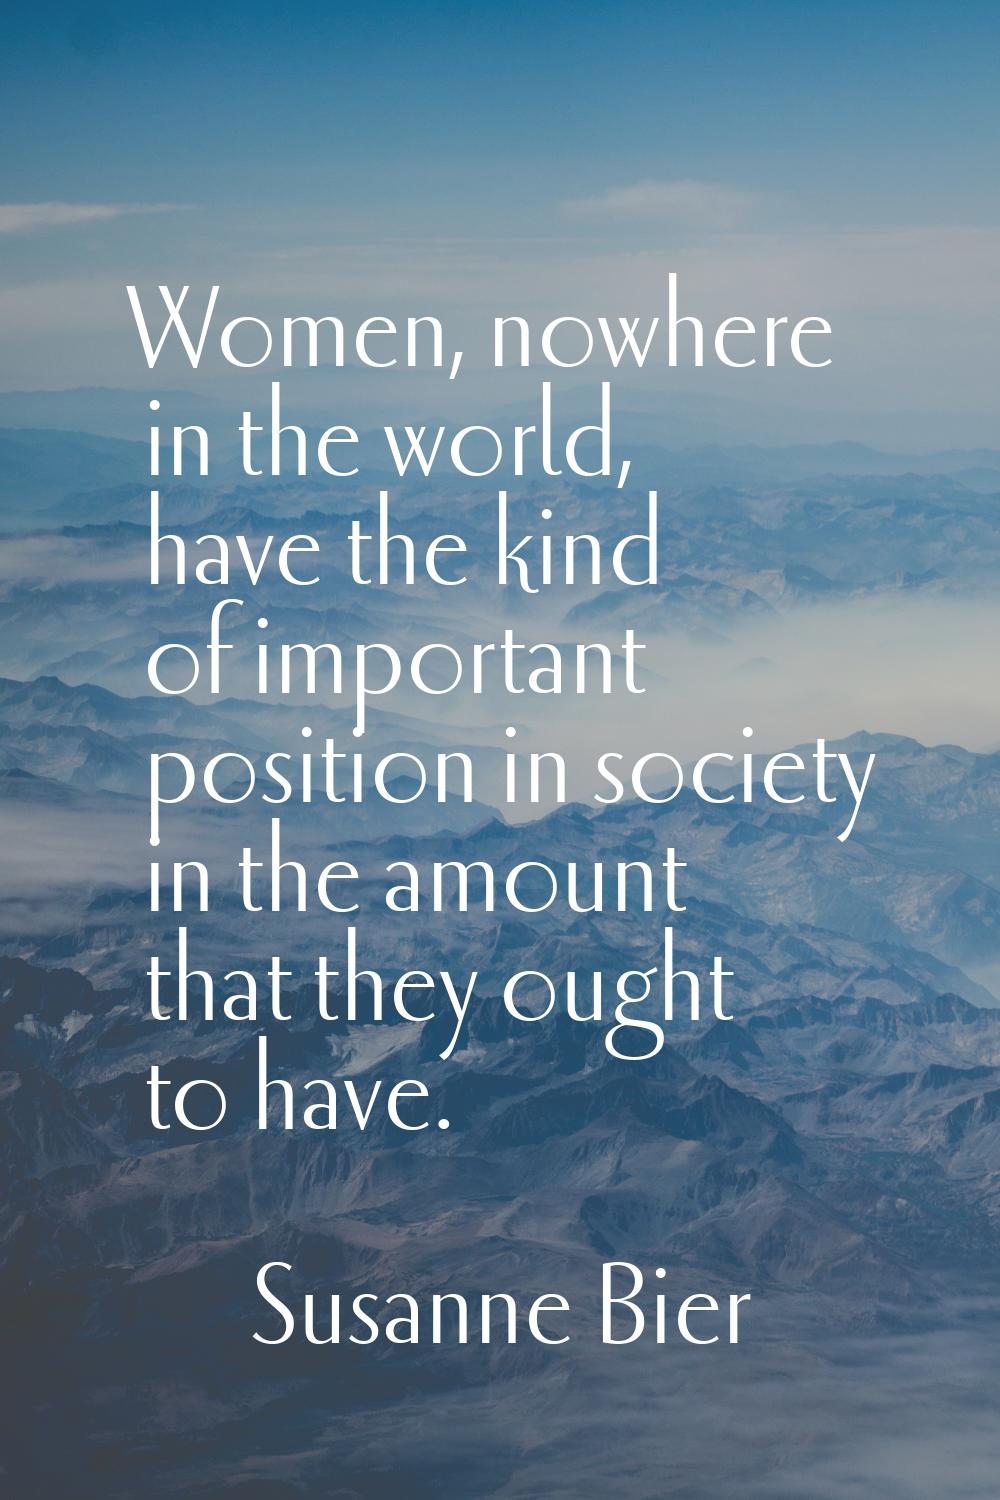 Women, nowhere in the world, have the kind of important position in society in the amount that they